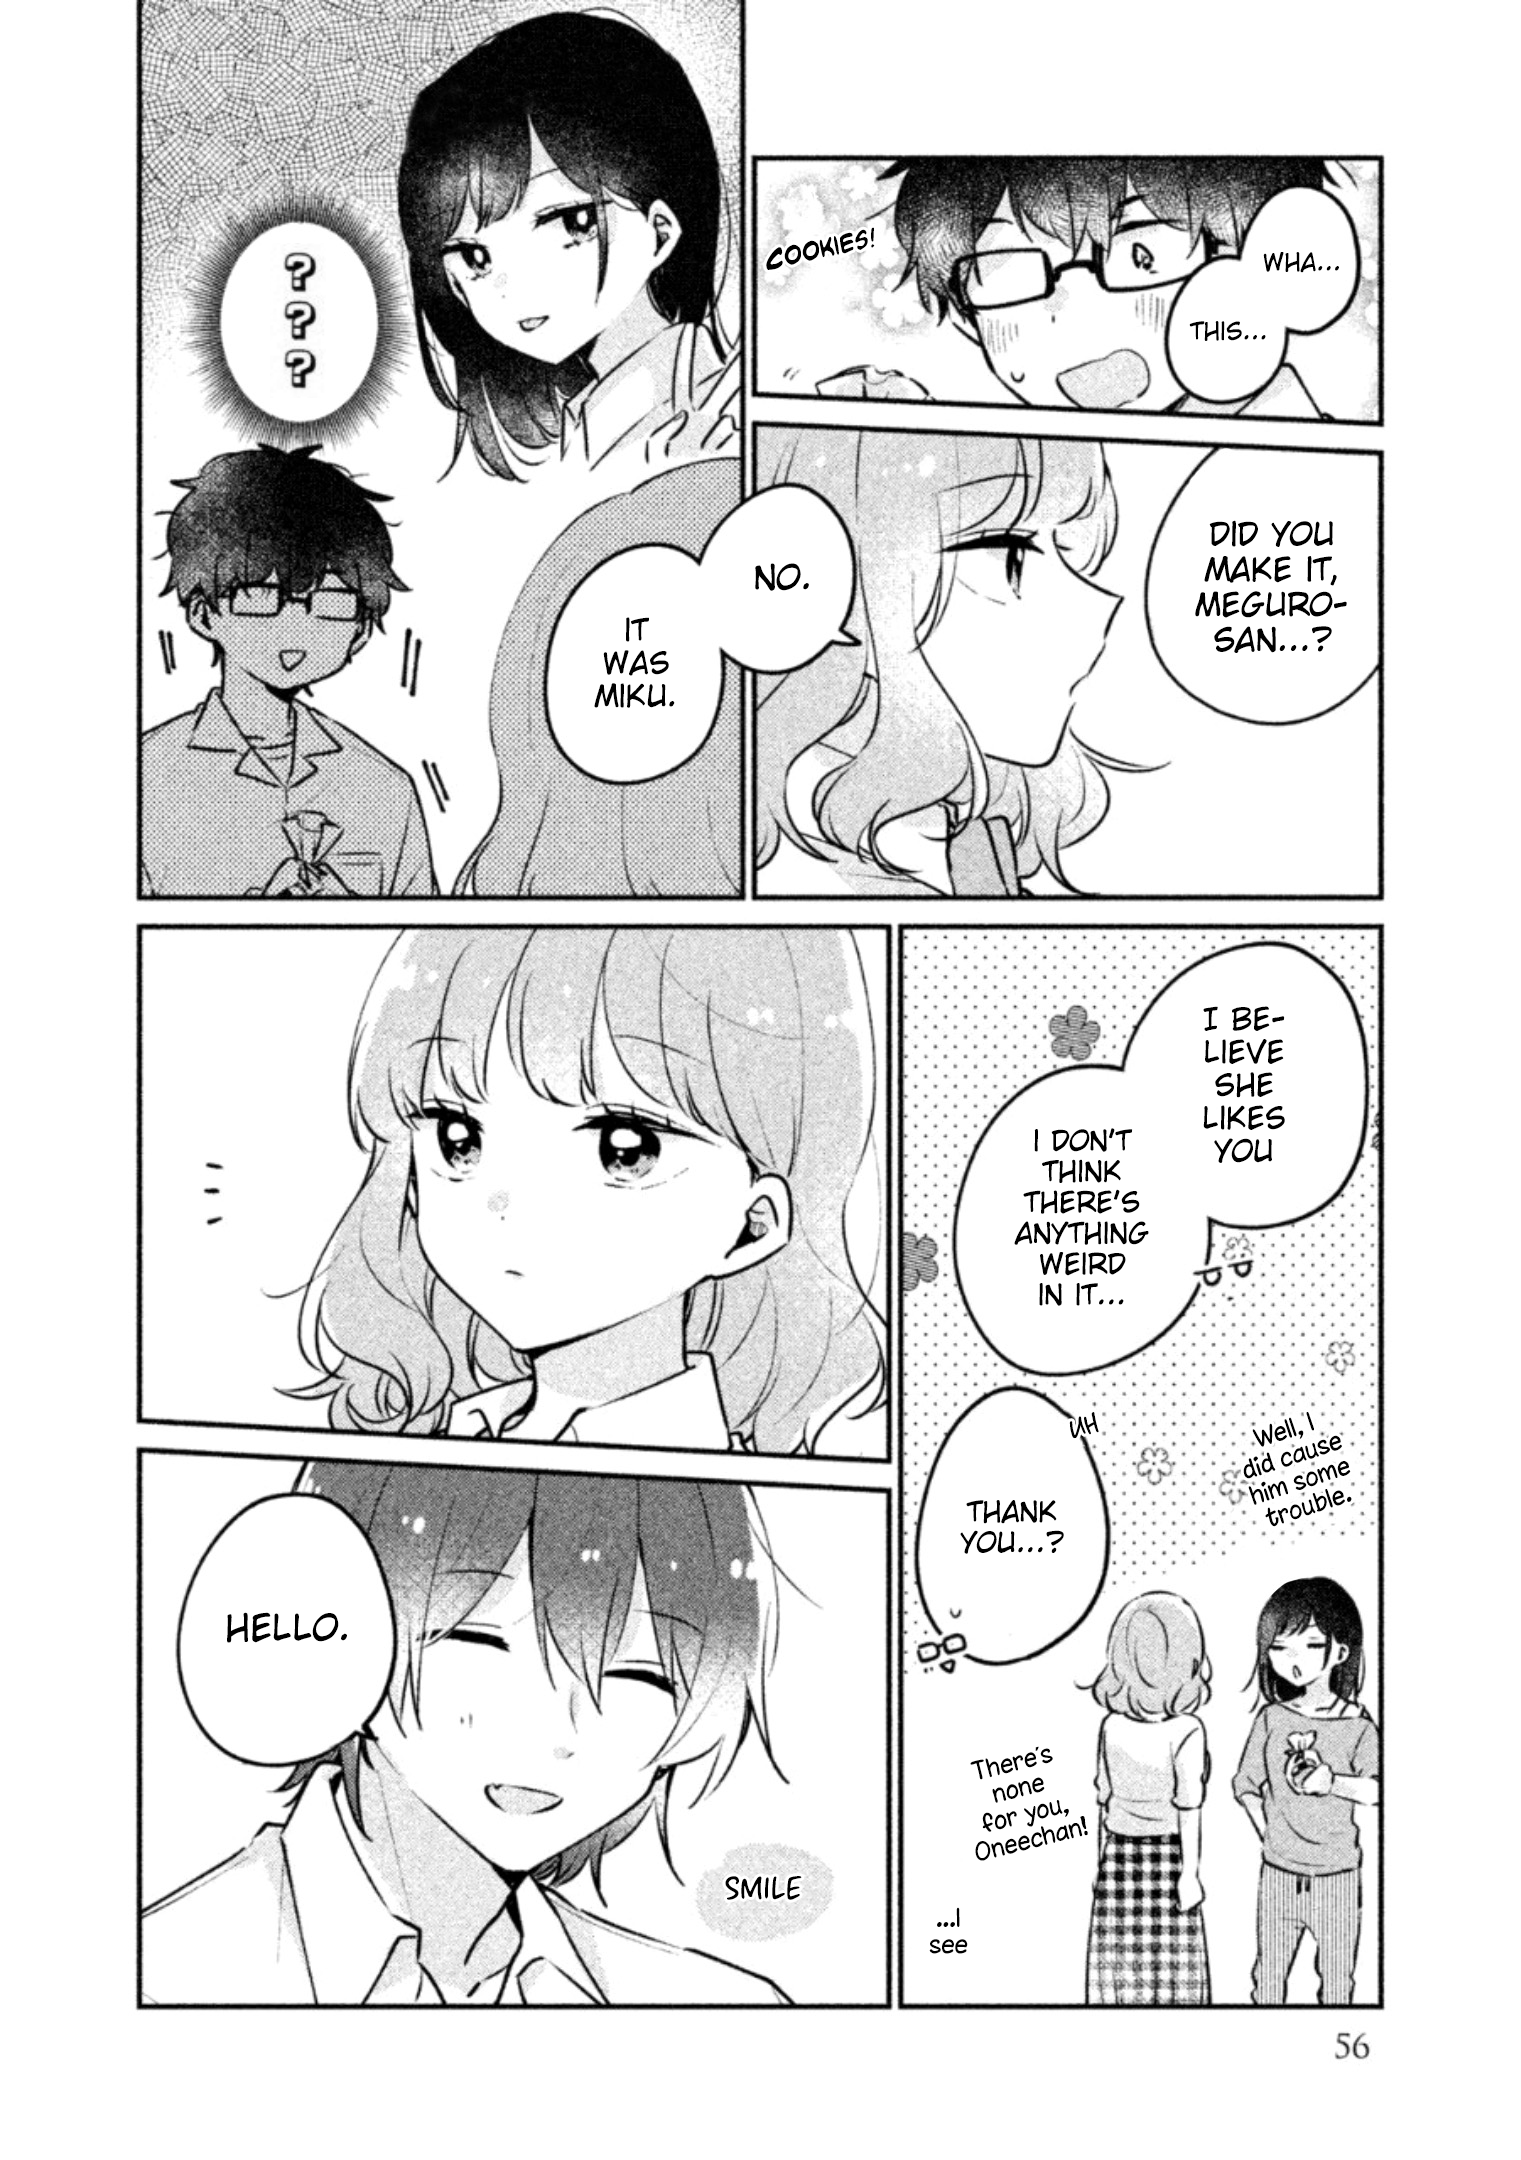 It's Not Meguro-san's First Time chapter 21 page 9